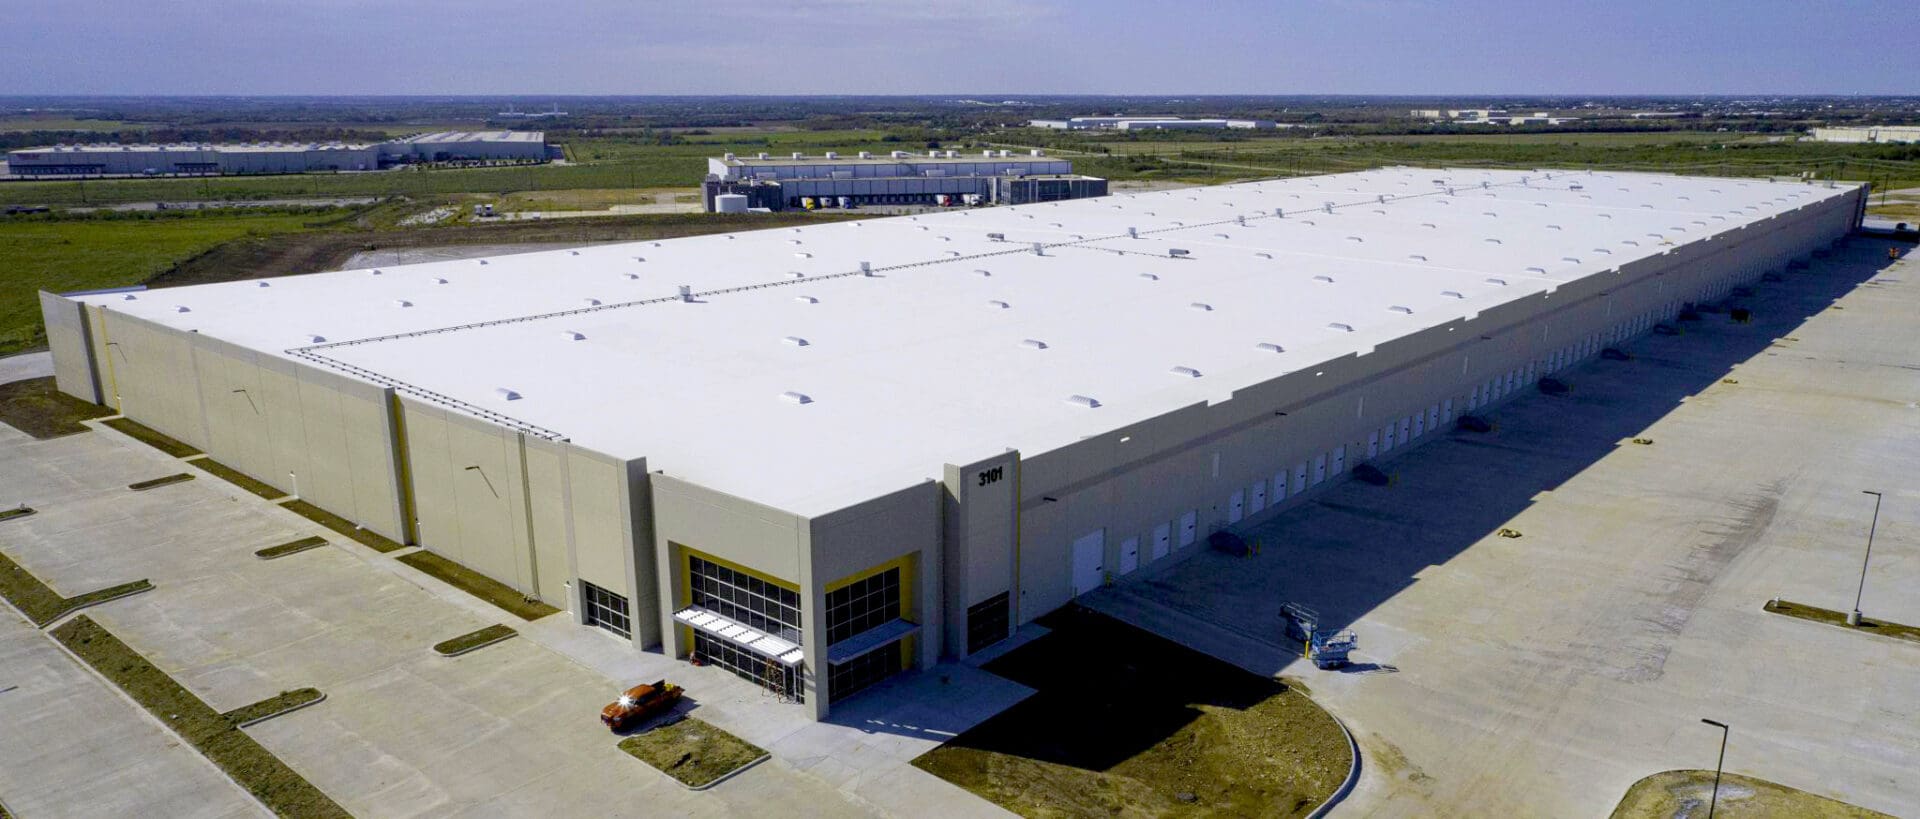 A large warehouse with many cars parked on the side.